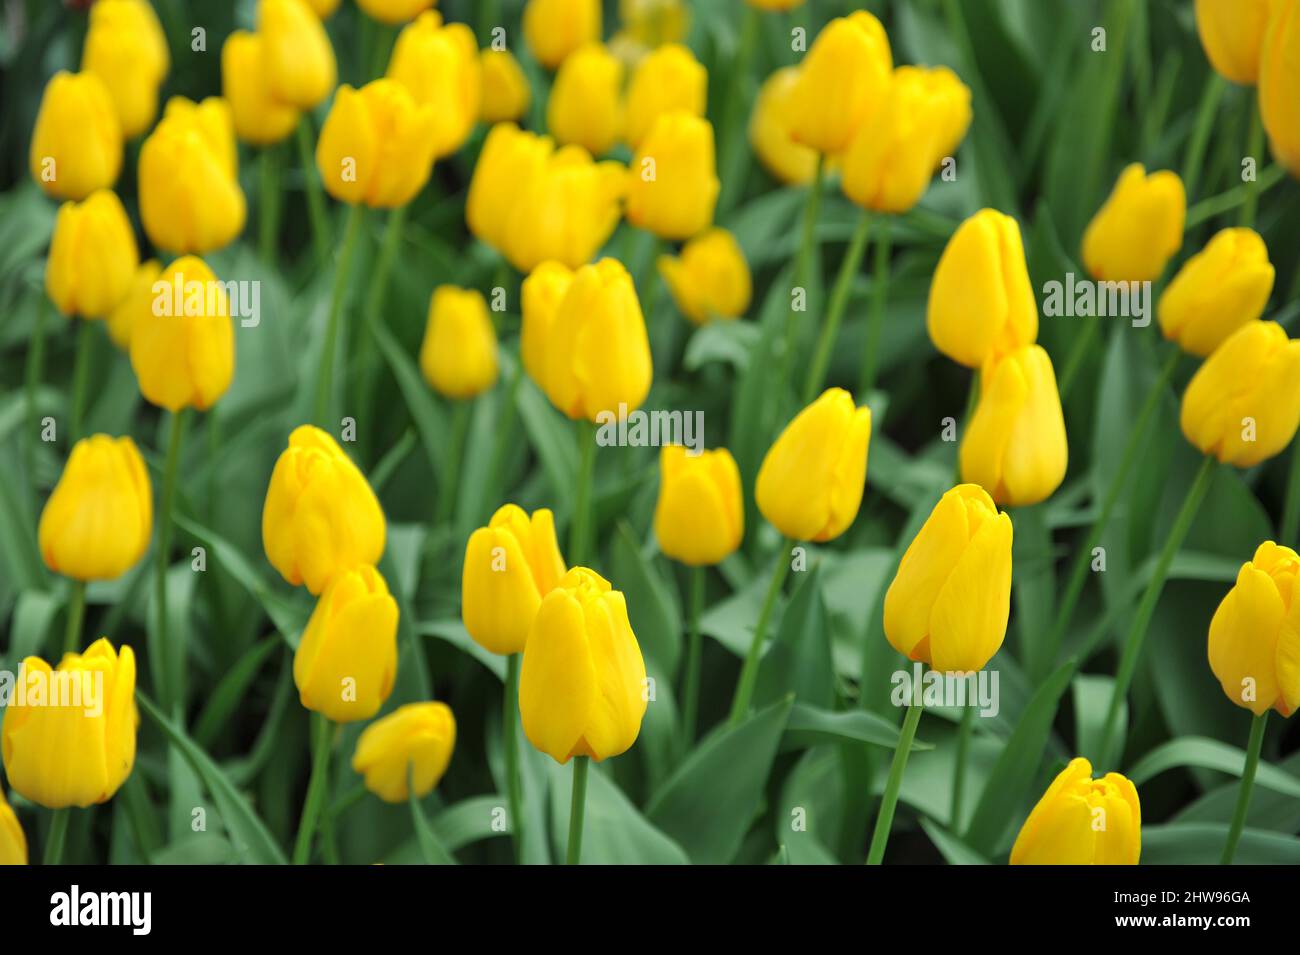 Yellow Triumph tulips (Tulipa) Lady Margot bloom in a garden in April Stock Photo